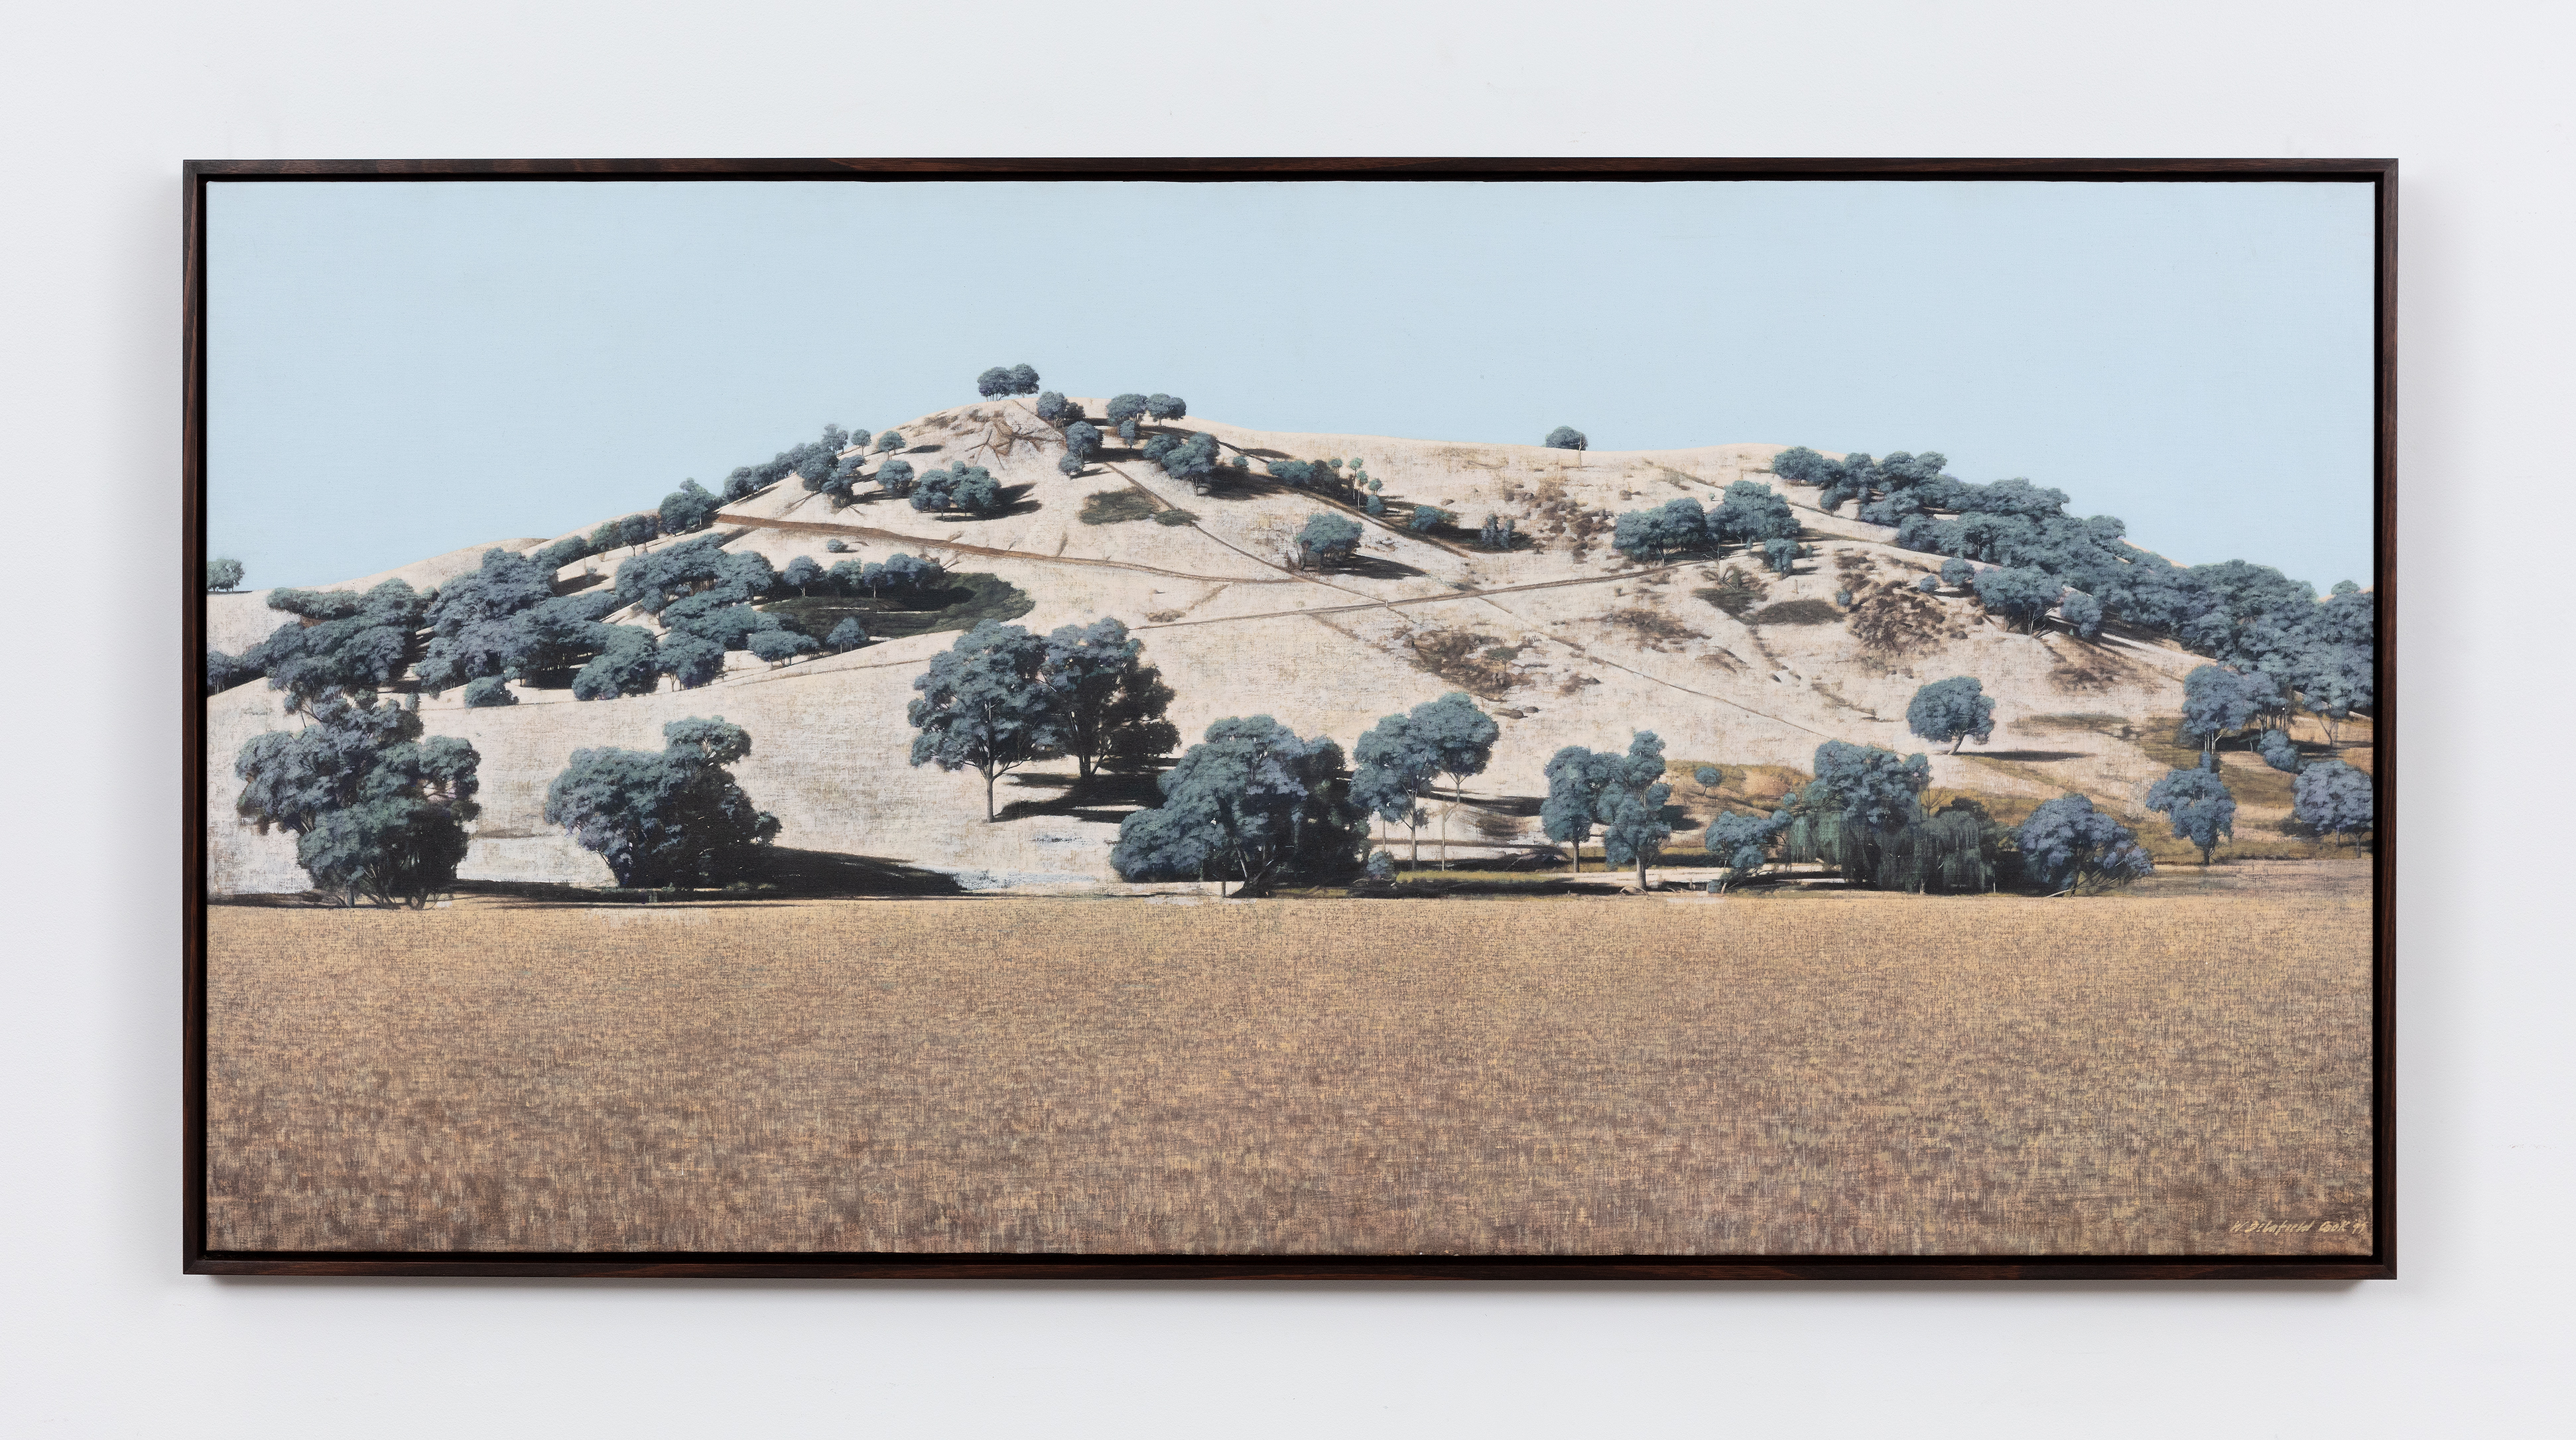 Landscape 1 by William Delafield Cook at Olsen Gallery